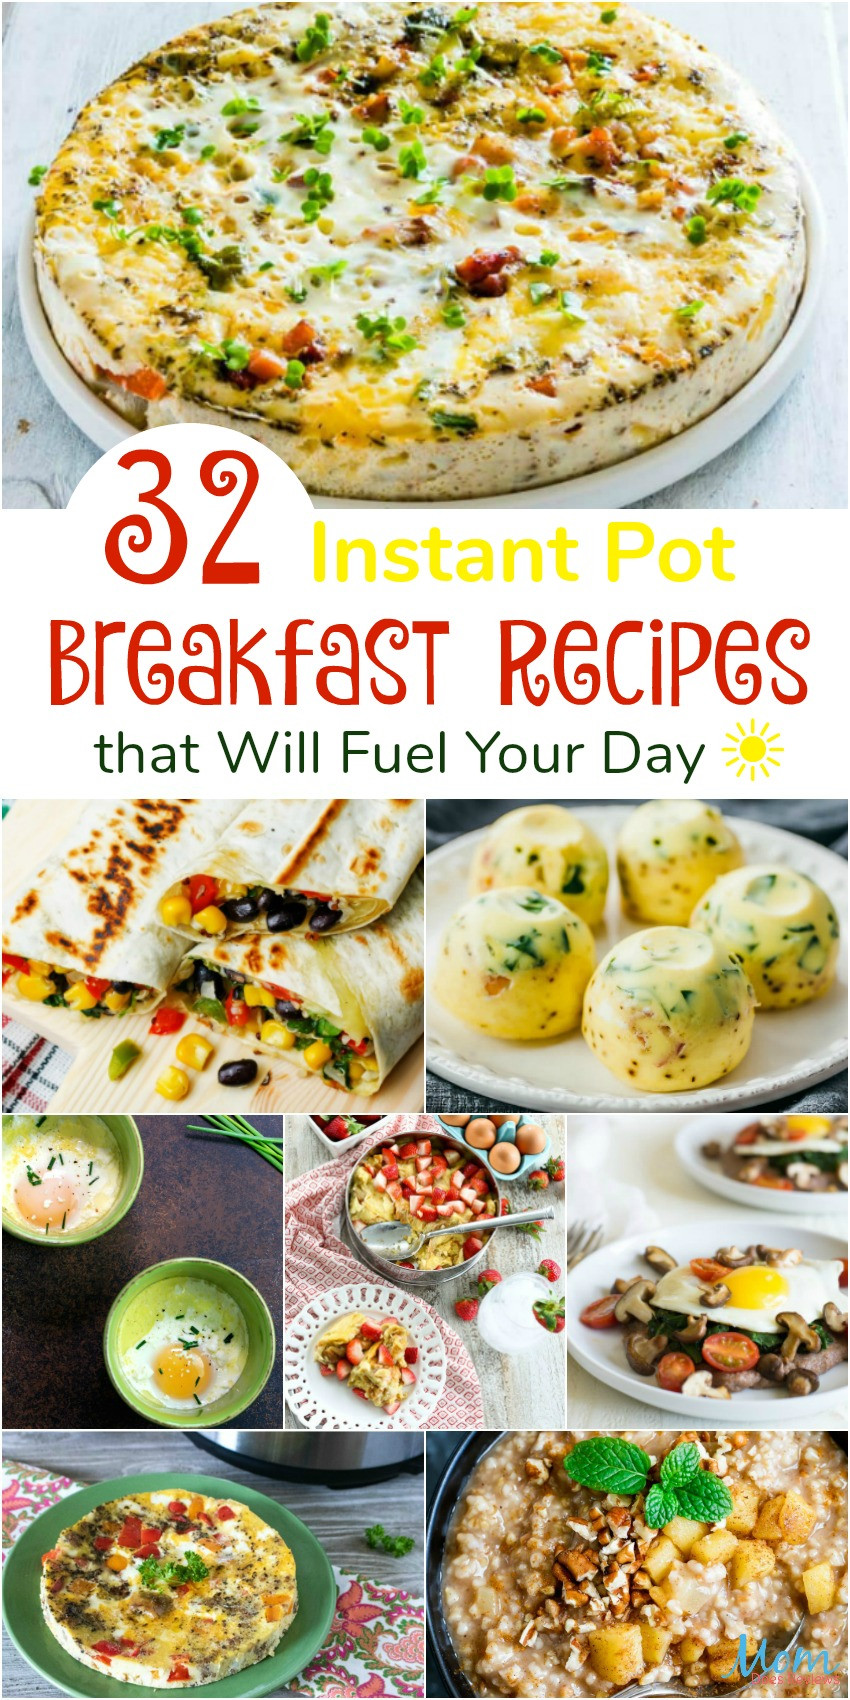 Instant Pot Breakfast Recipes
 32 Instant Pot Breakfast Recipes that Will Fuel Your Day